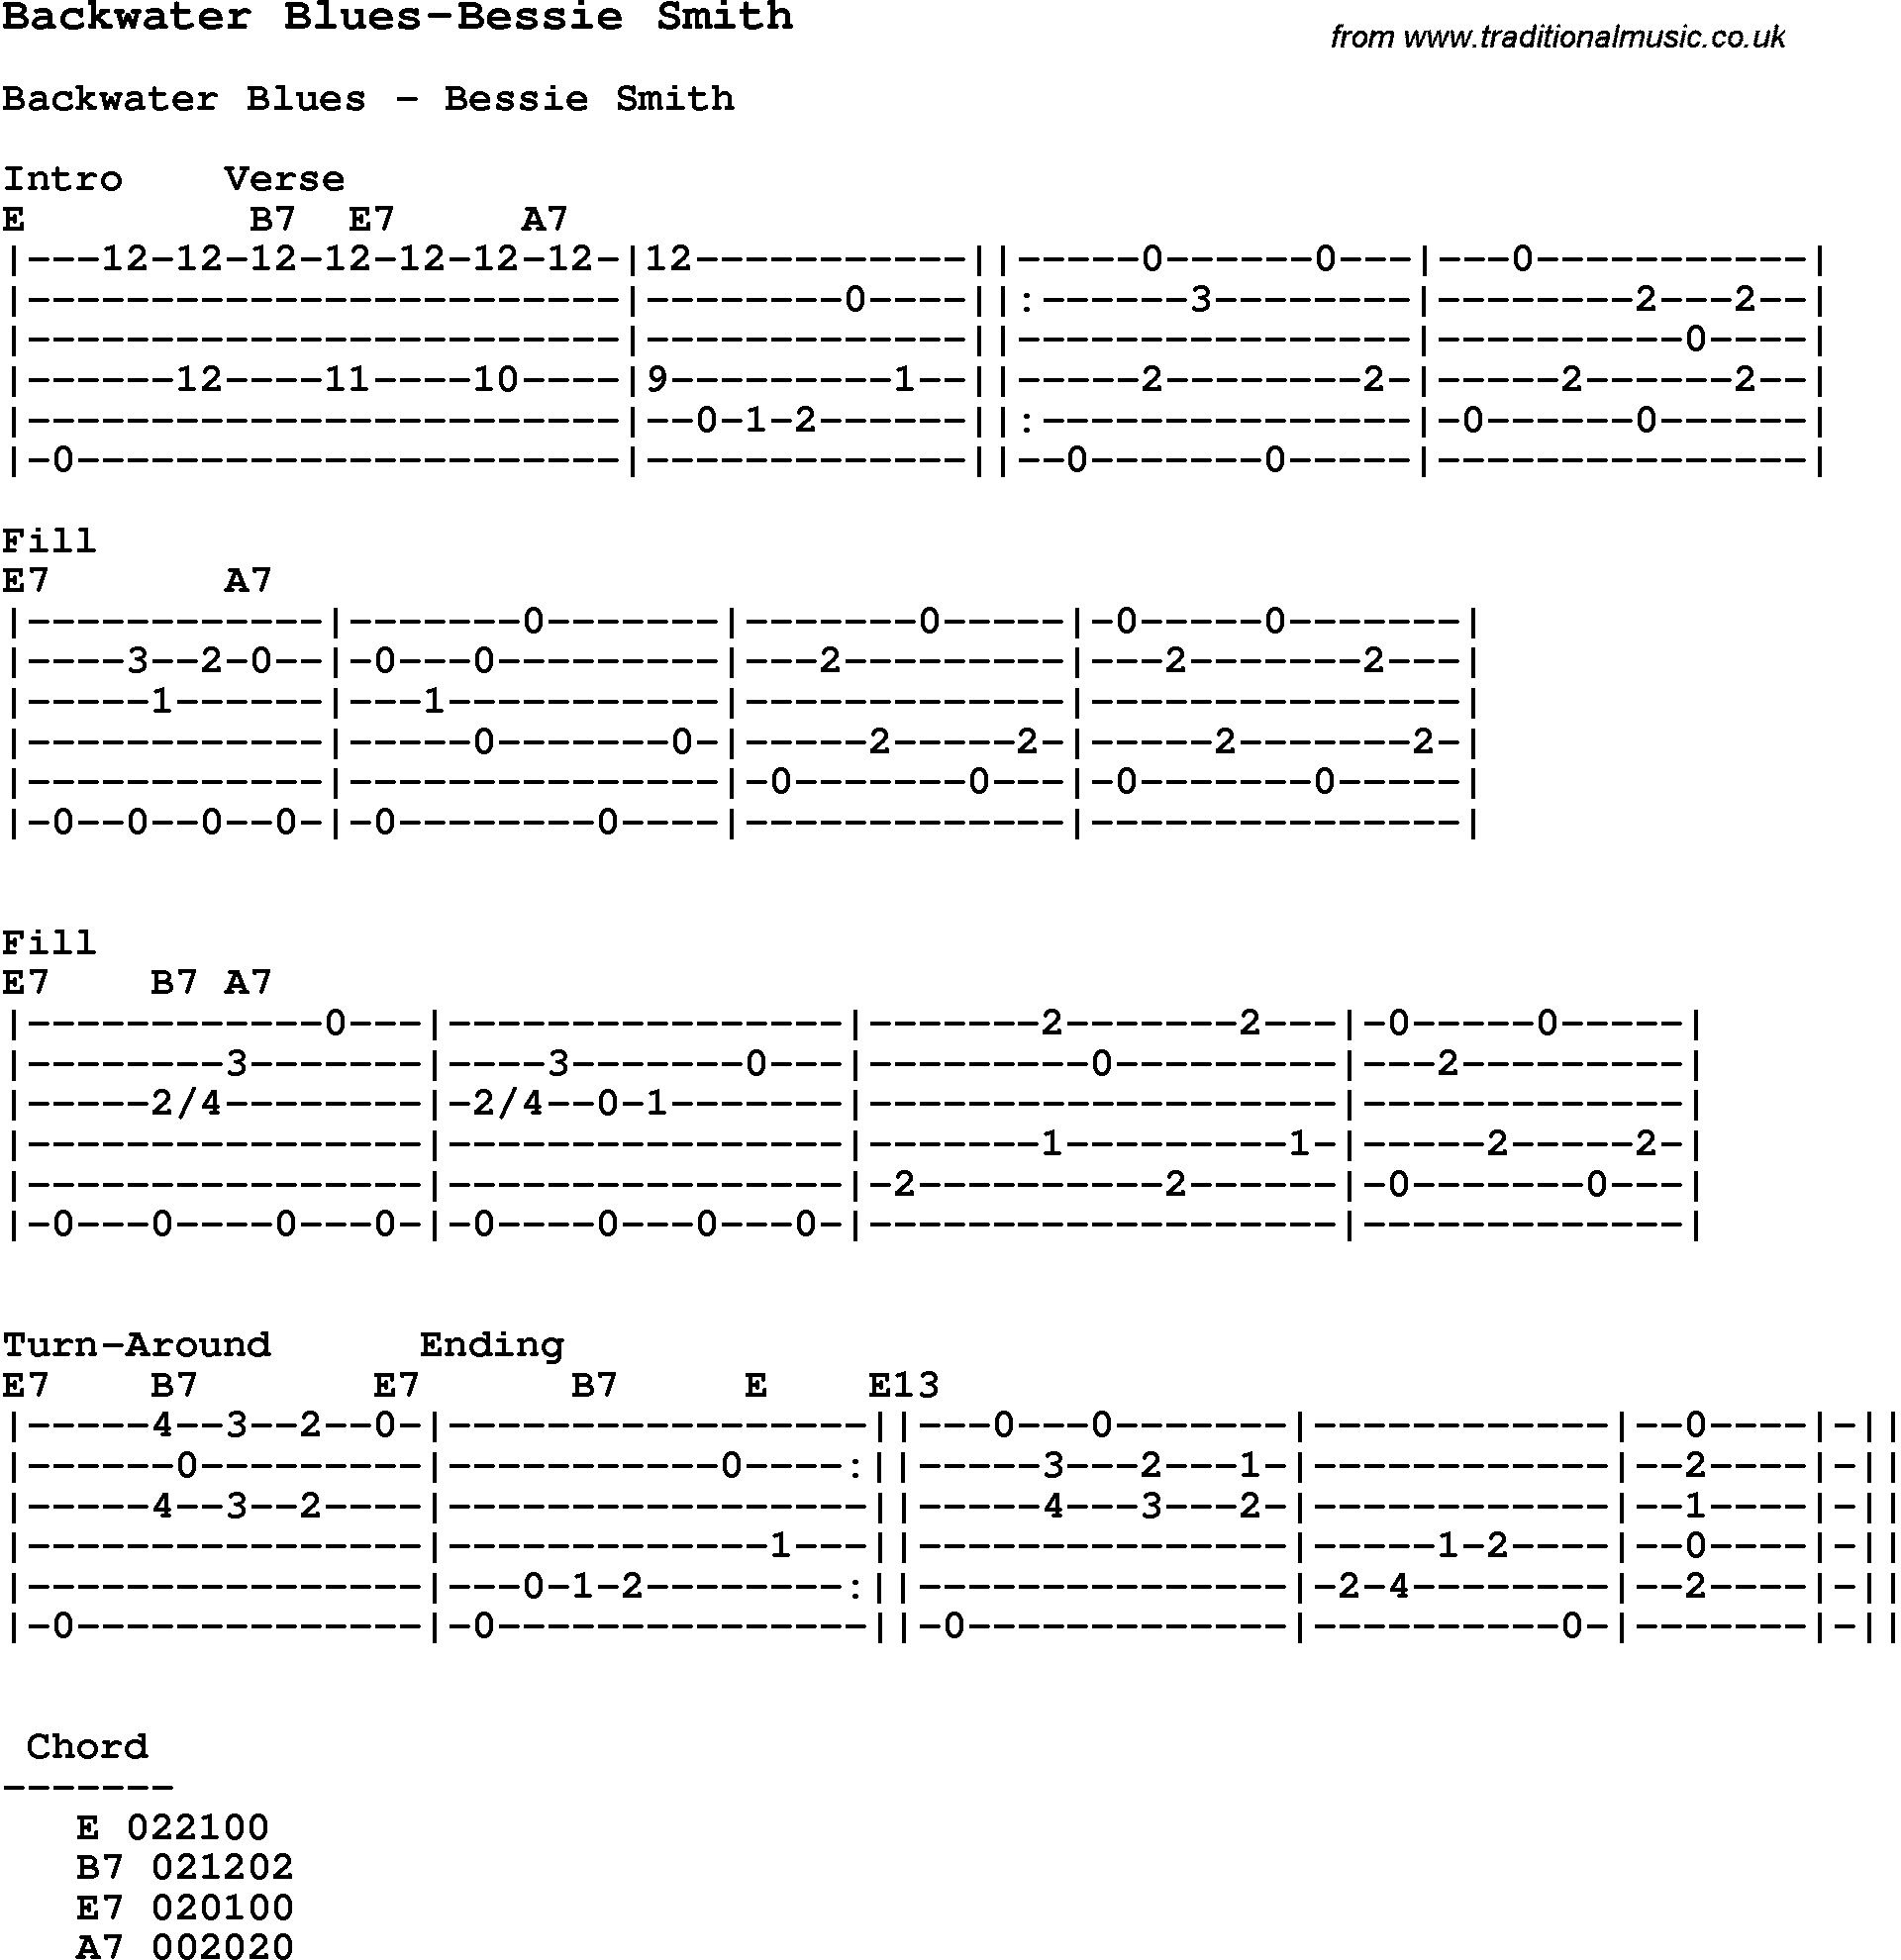 Blues Guitar Song, lyrics, chords, tablature, playing hints for Backwater Blues-Bessie Smith